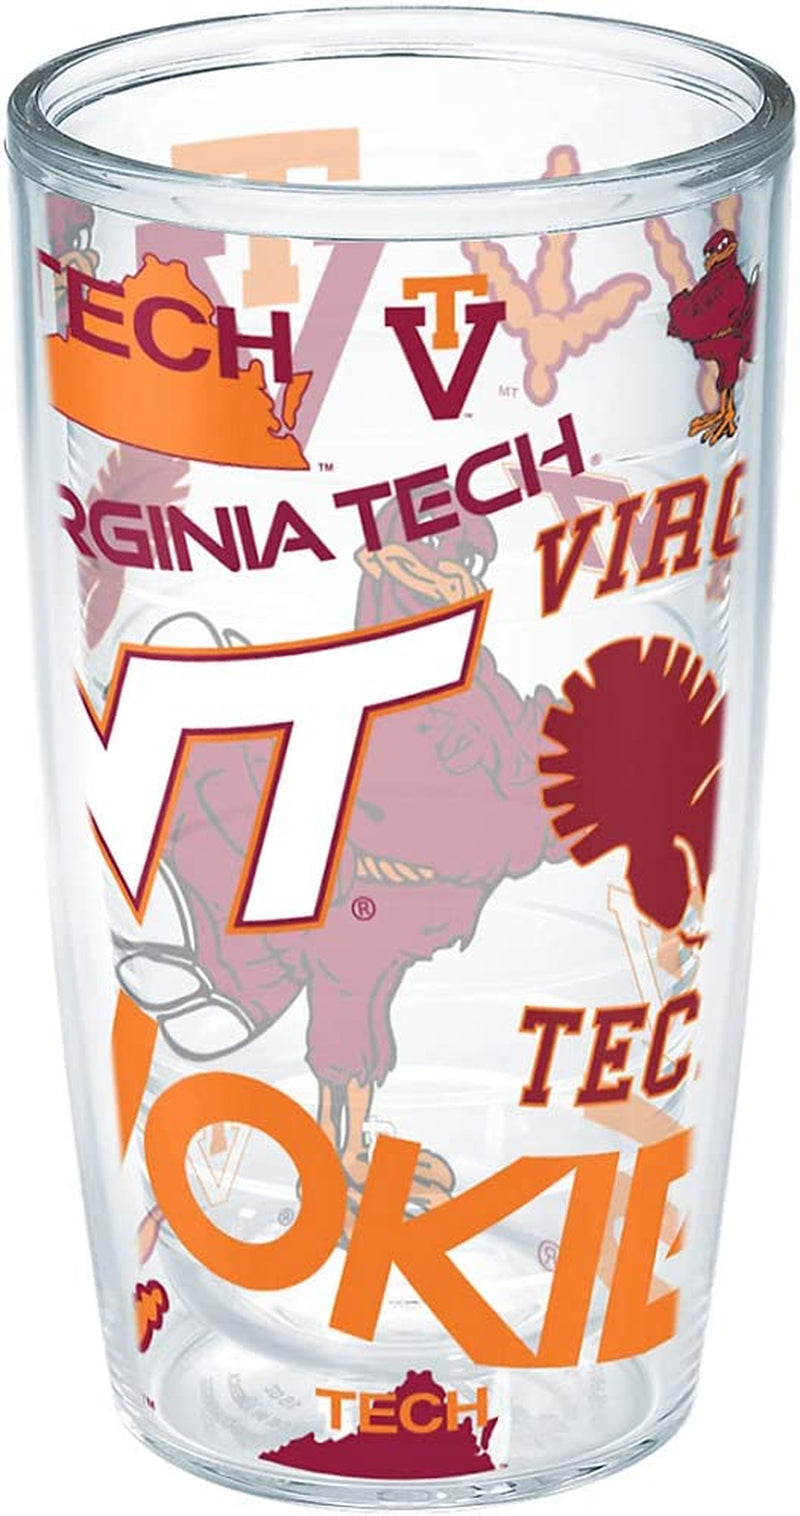 Tervis Virginia Tech University Hokies Made in USA Double Walled Insulated Tumbler, 1 Count (Pack of 1), Maroon